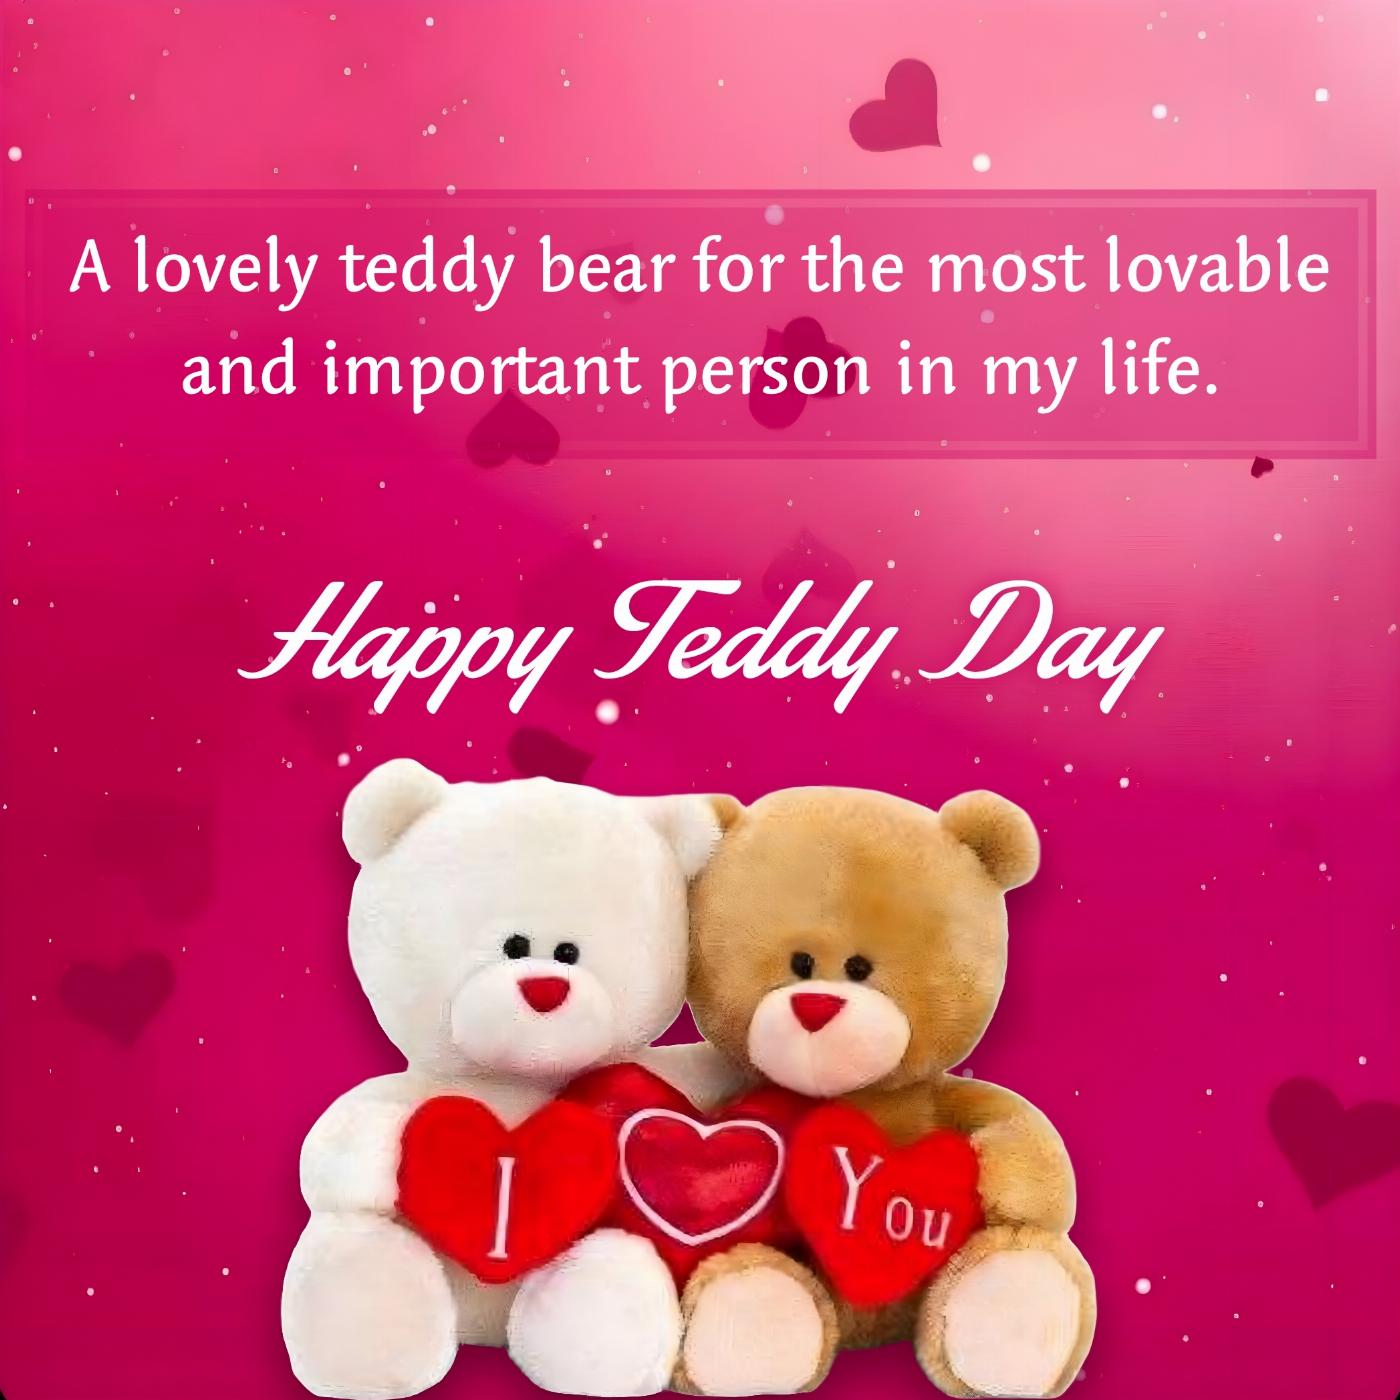 A lovely teddy bear for the most lovable and important person